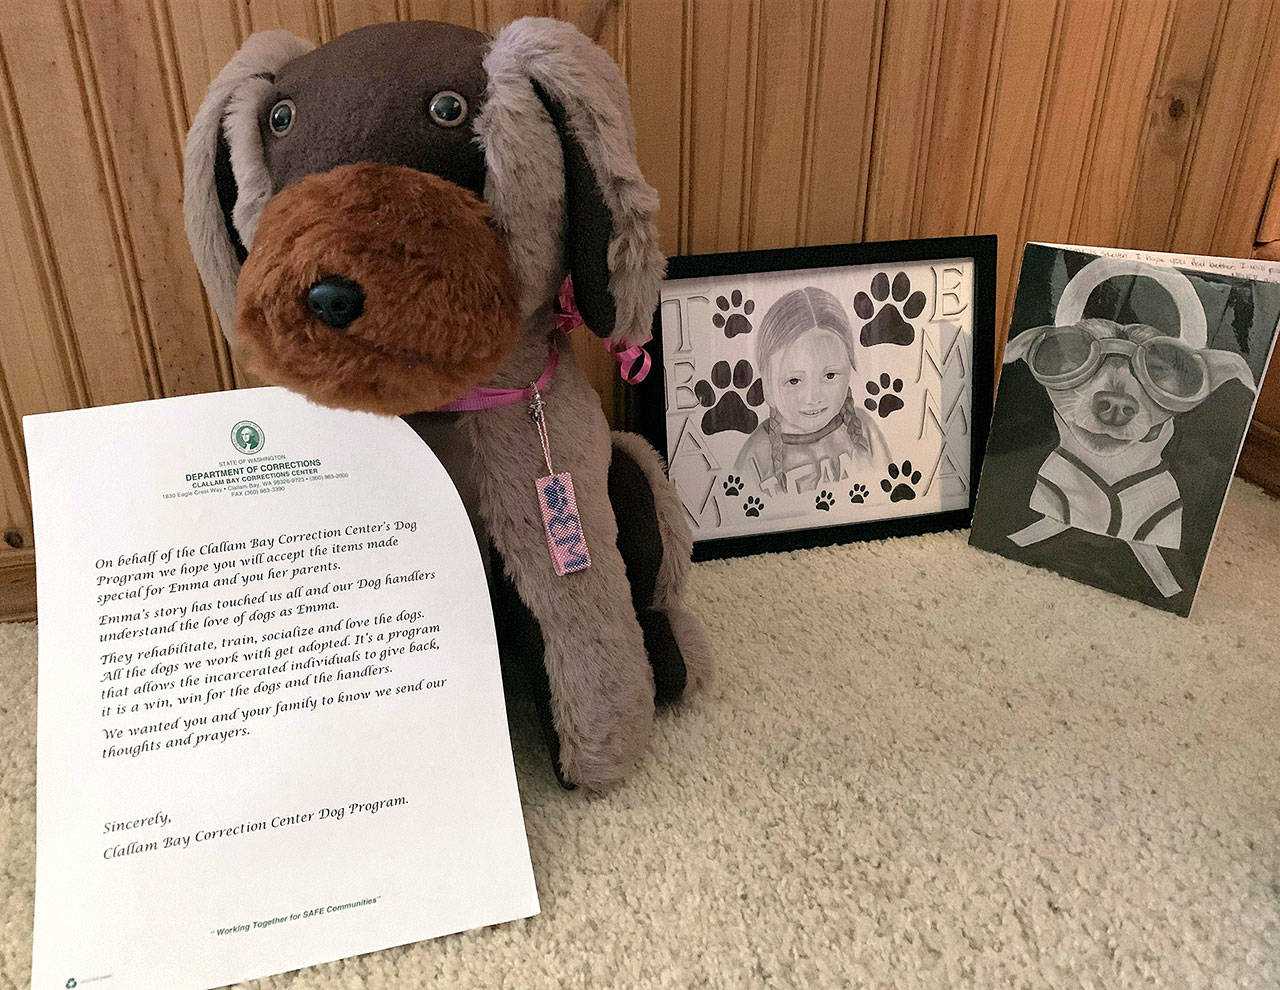 Prisoners at the Clallam Bay Corrections Center sent this care package to Emma Mertens, a 7-year-old Wisconsin girl who is battling a rare form of cancer. (Department of Corrections)